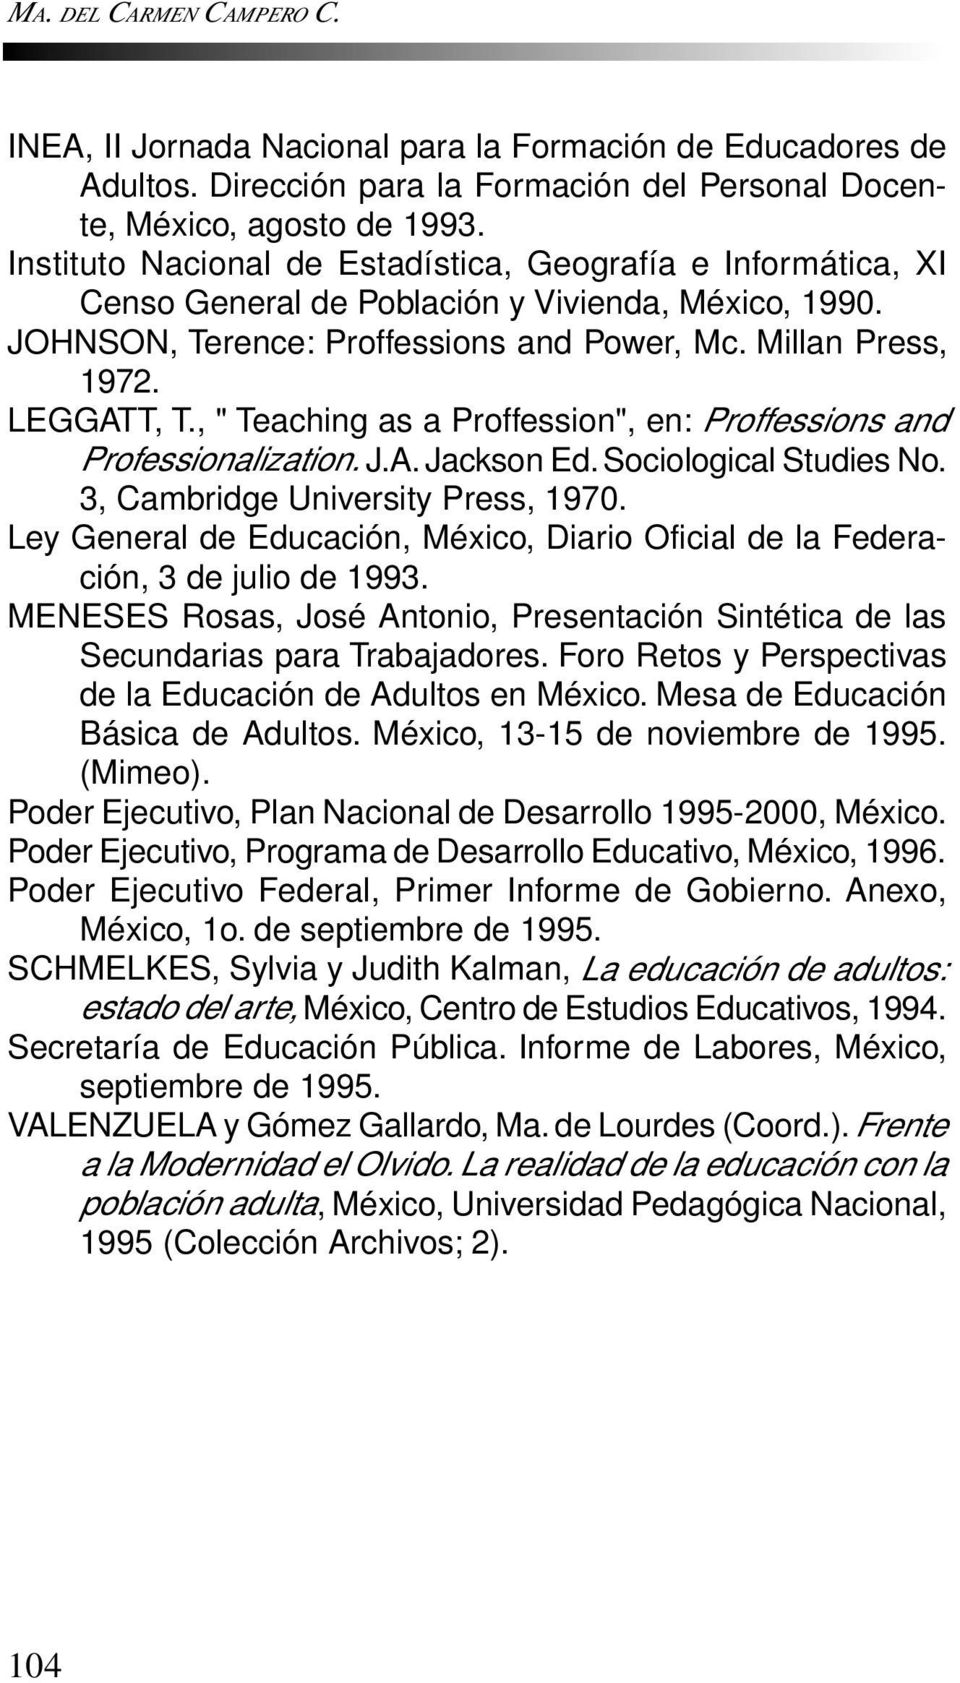 , " Teaching as a Proffession", en: Proffessions and Professionalization. J.A. Jackson Ed. Sociological Studies No. 3, Cambridge University Press, 1970.